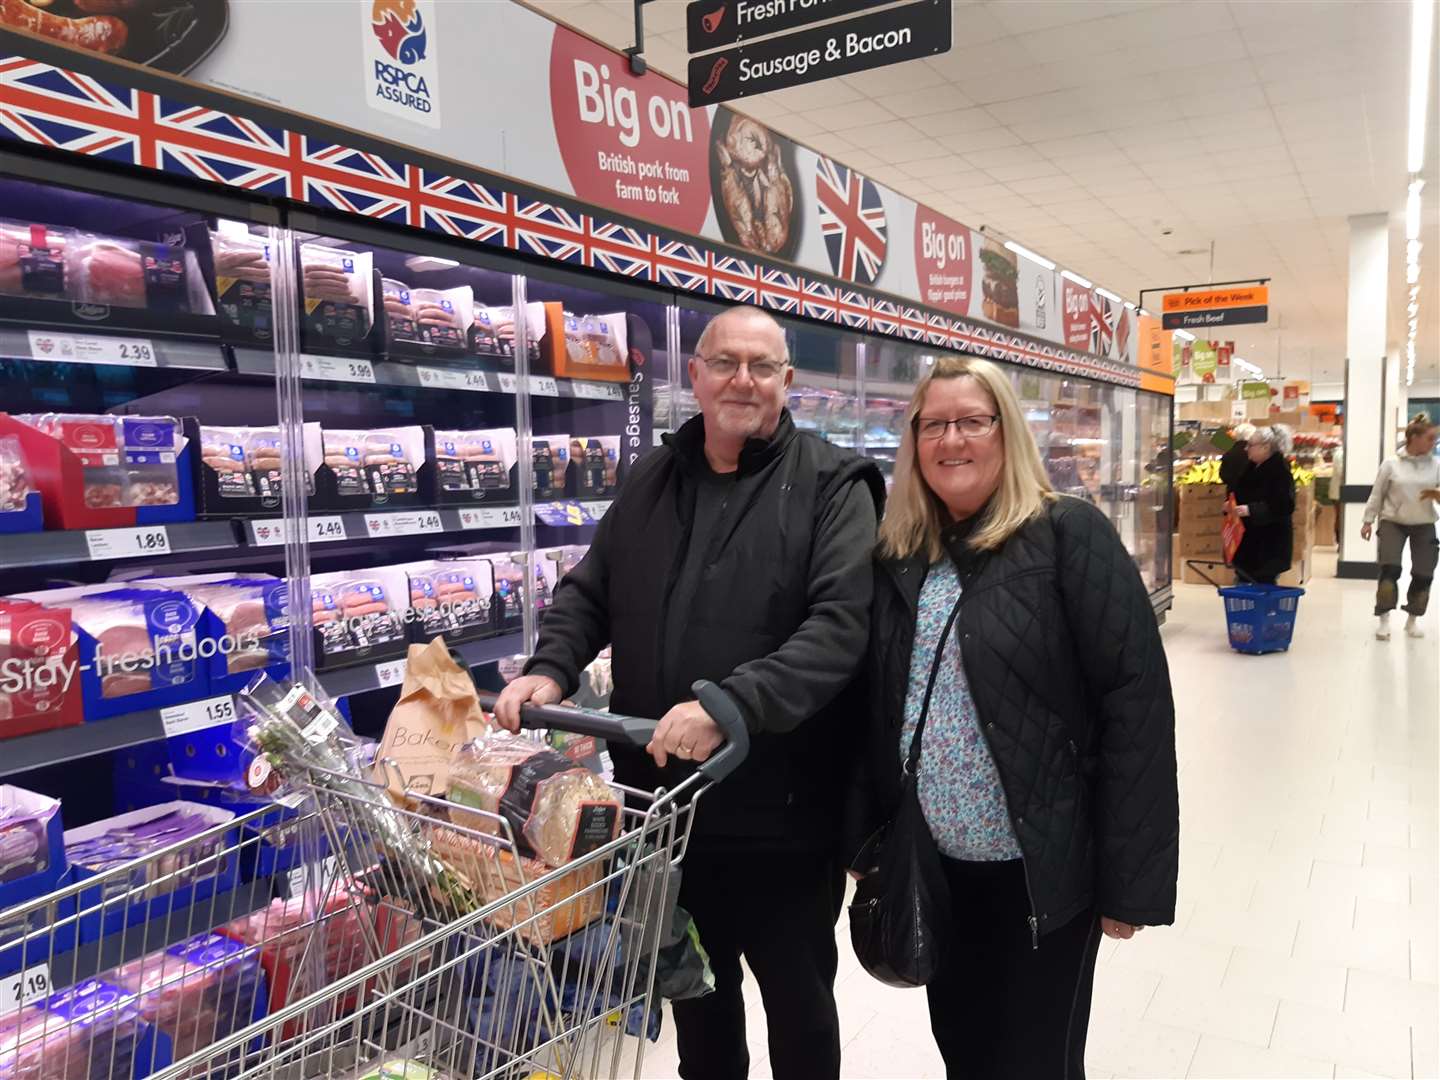 Paul and Sally Savage, from Allington, are Lidl regulars